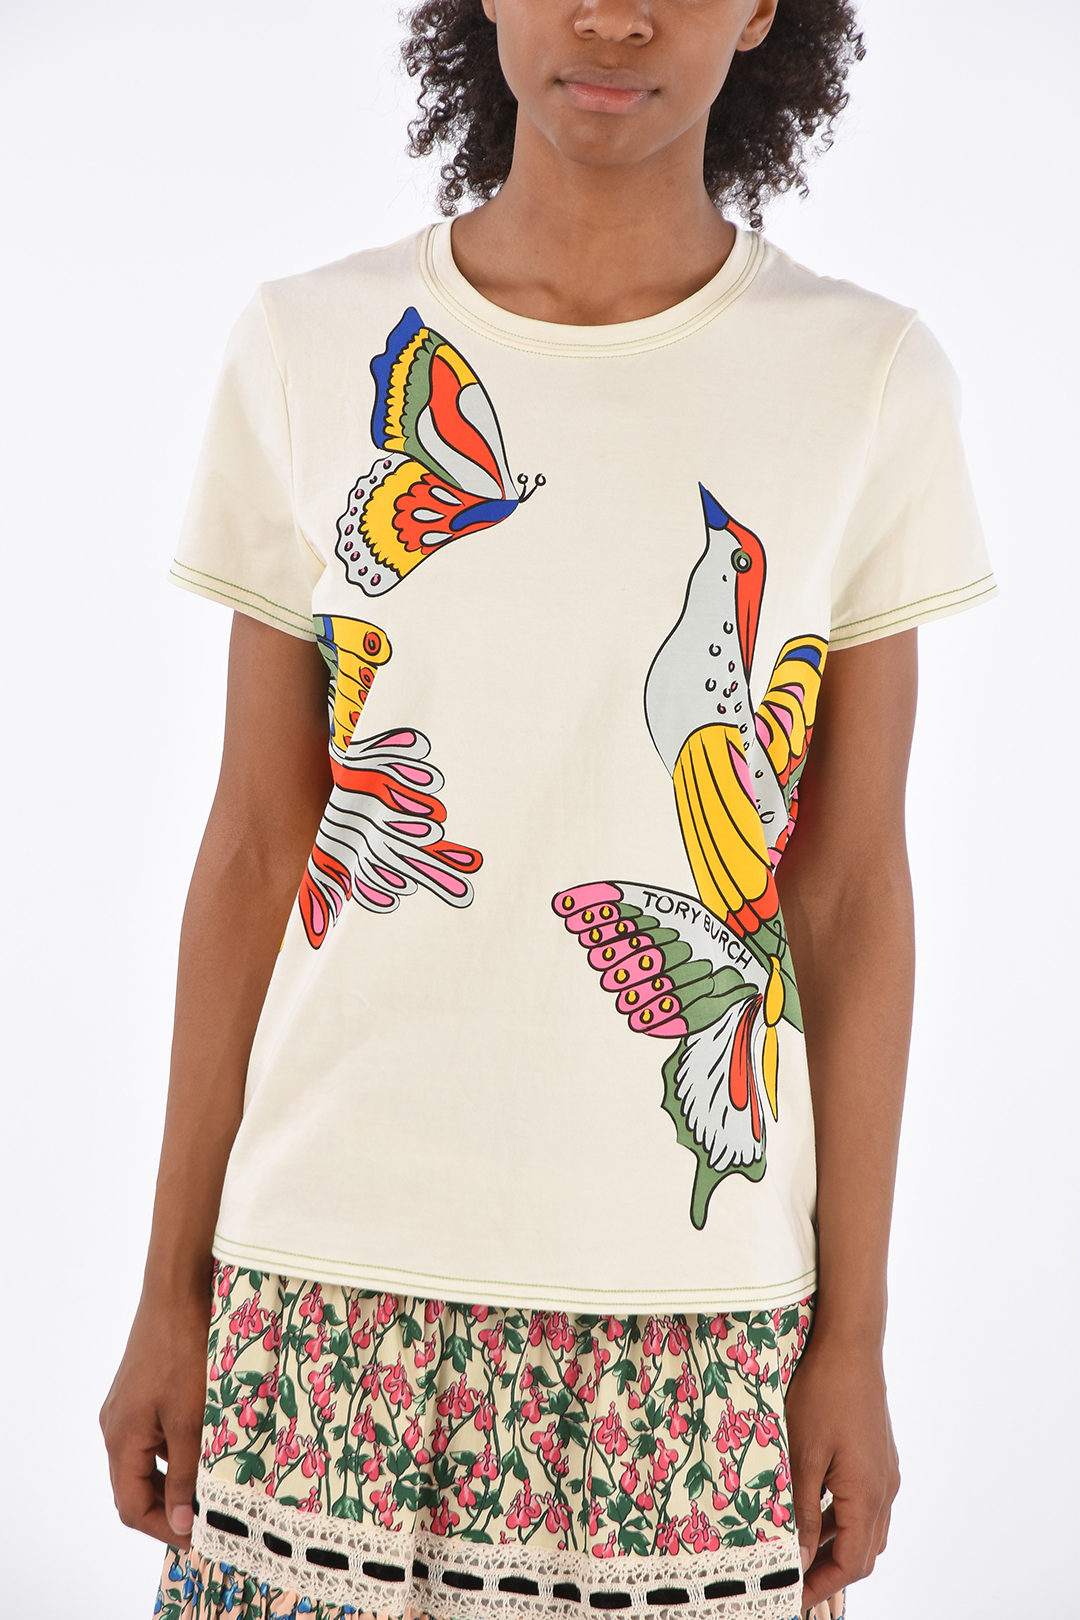 Tory Burch Cotton Promised Land Large Bird T-Shirt women - Glamood Outlet